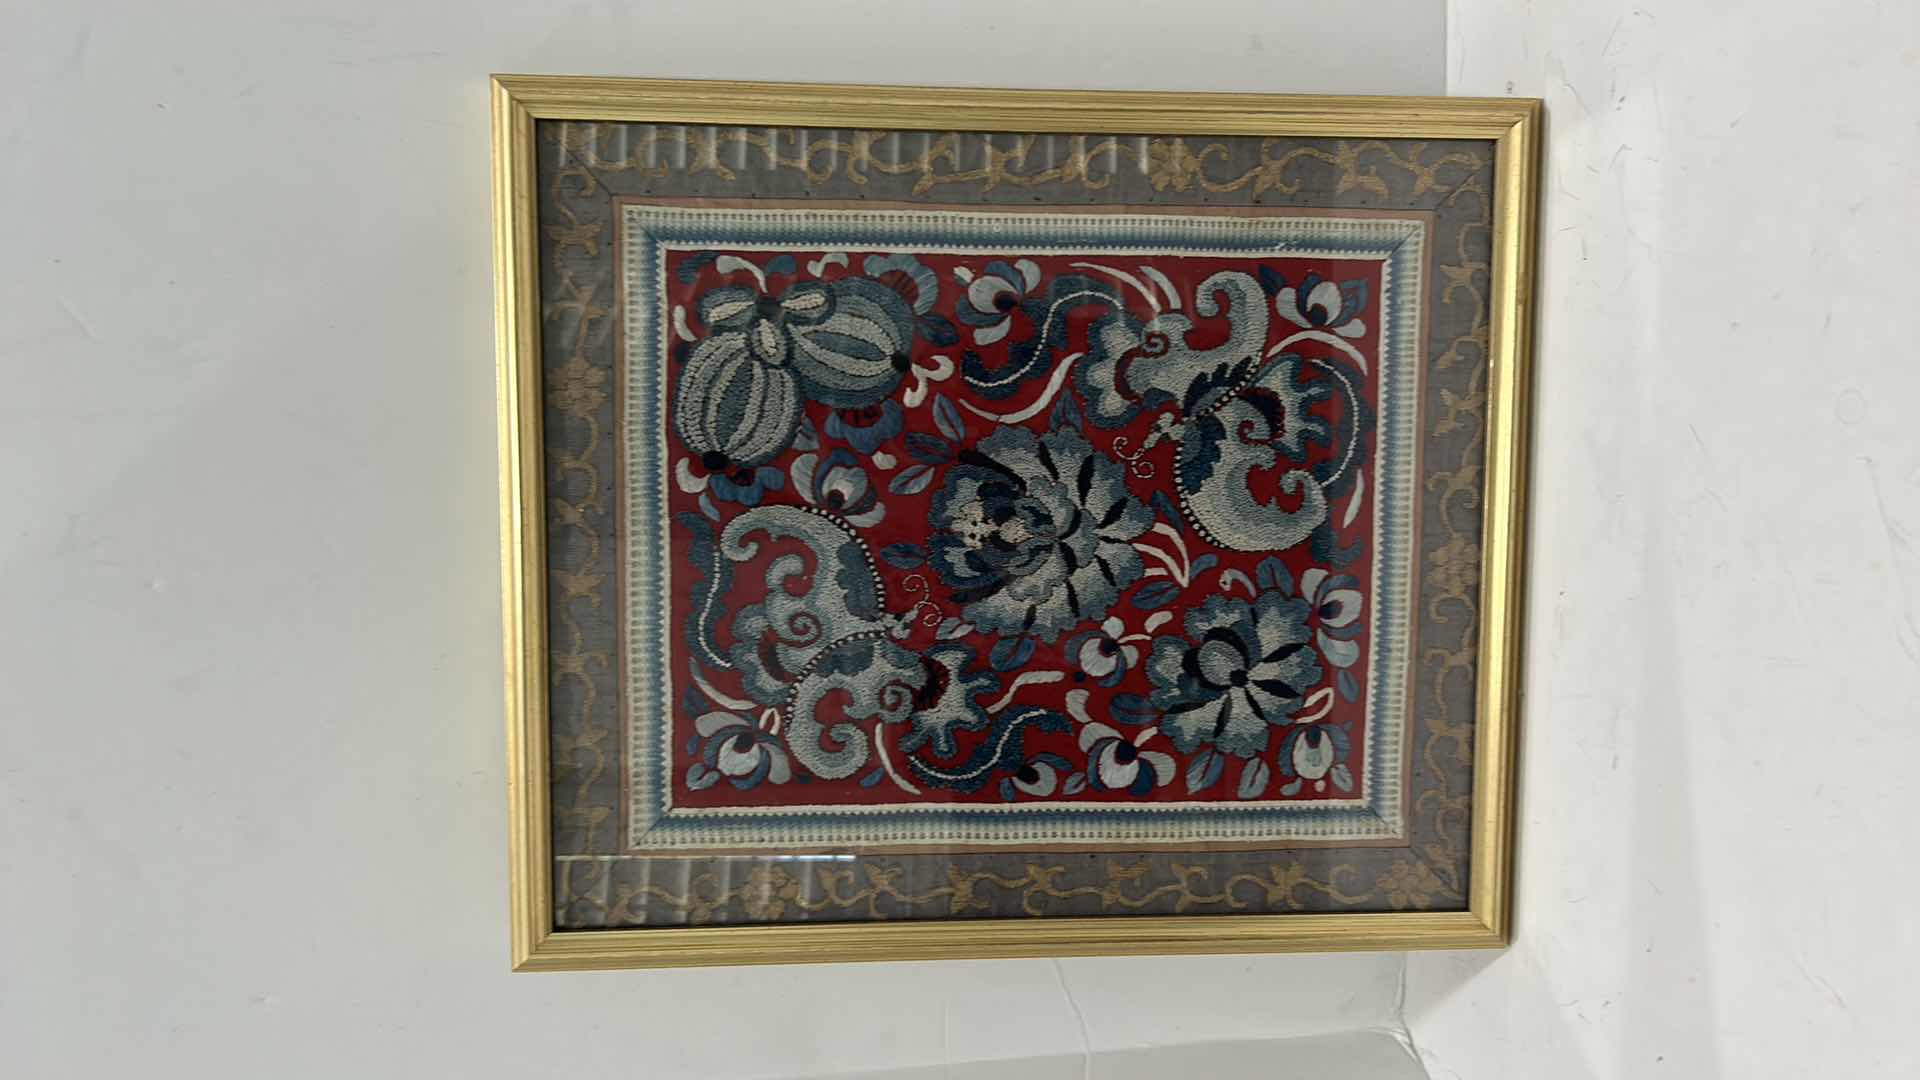 Photo 5 of ANTIQUE CHINESE TEXTILE FABRIC, SILK WITH SILK THREAD HAND EMBROIDERY ARTWORK FRAMED 14 1/2” x 17”